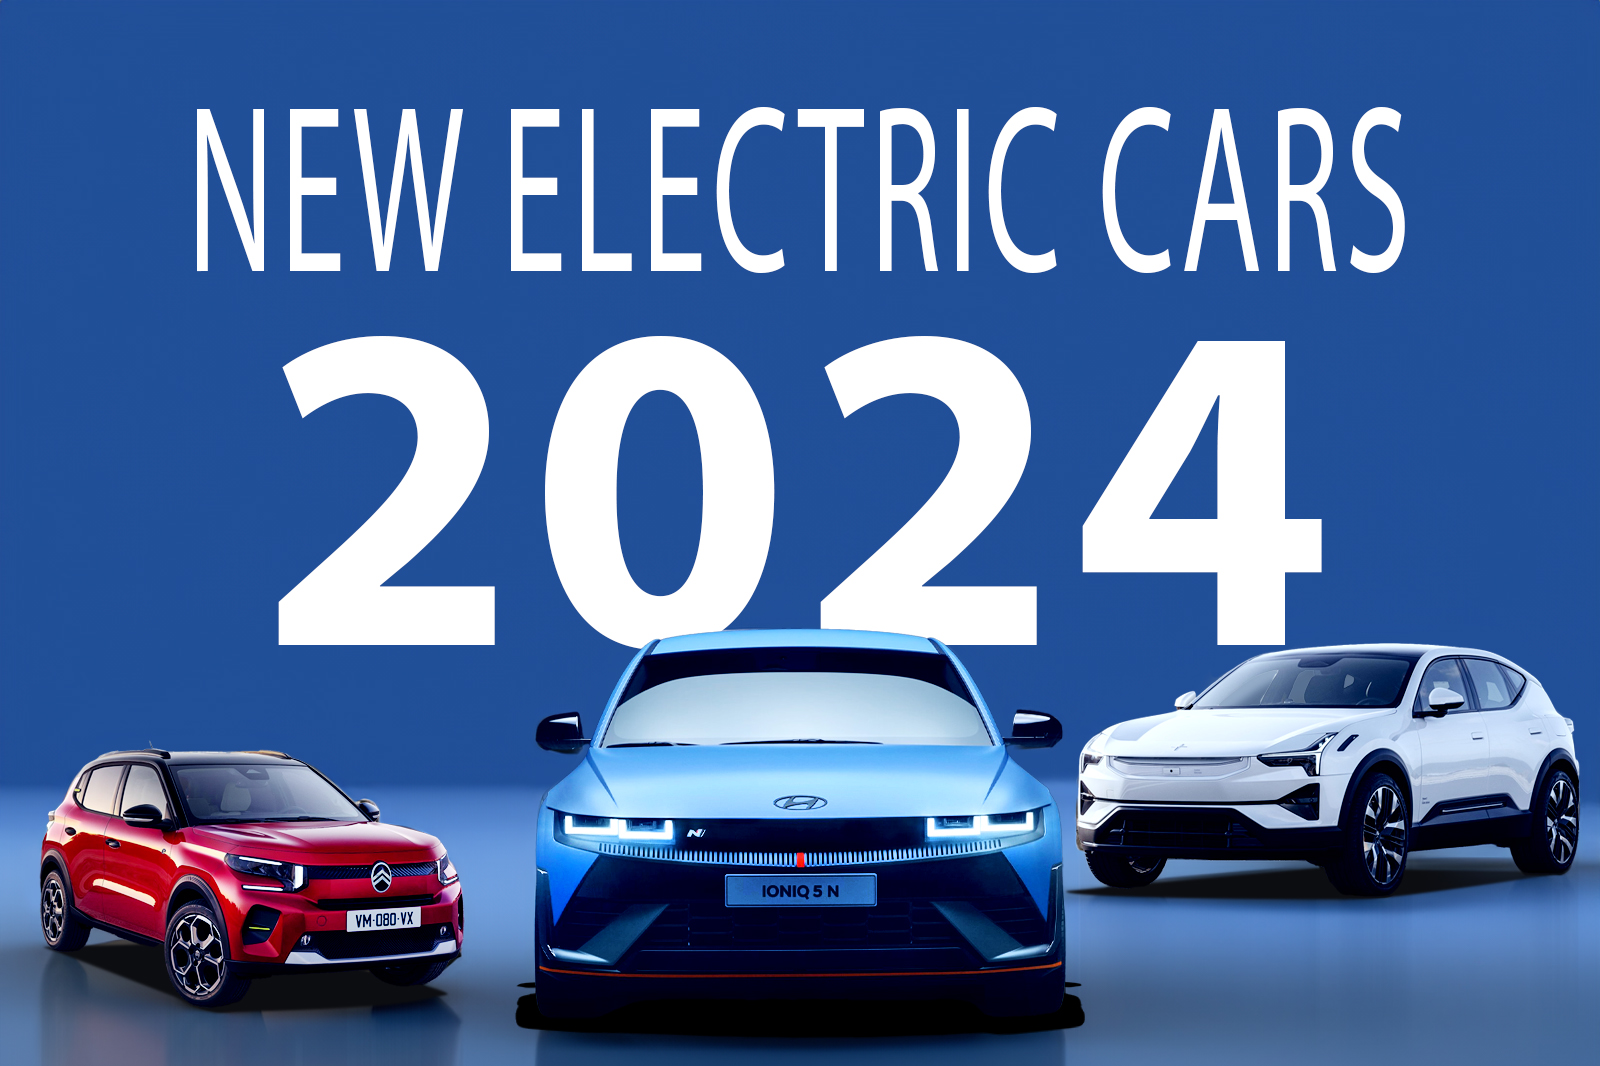 New electric cars coming in 2024 Automundo